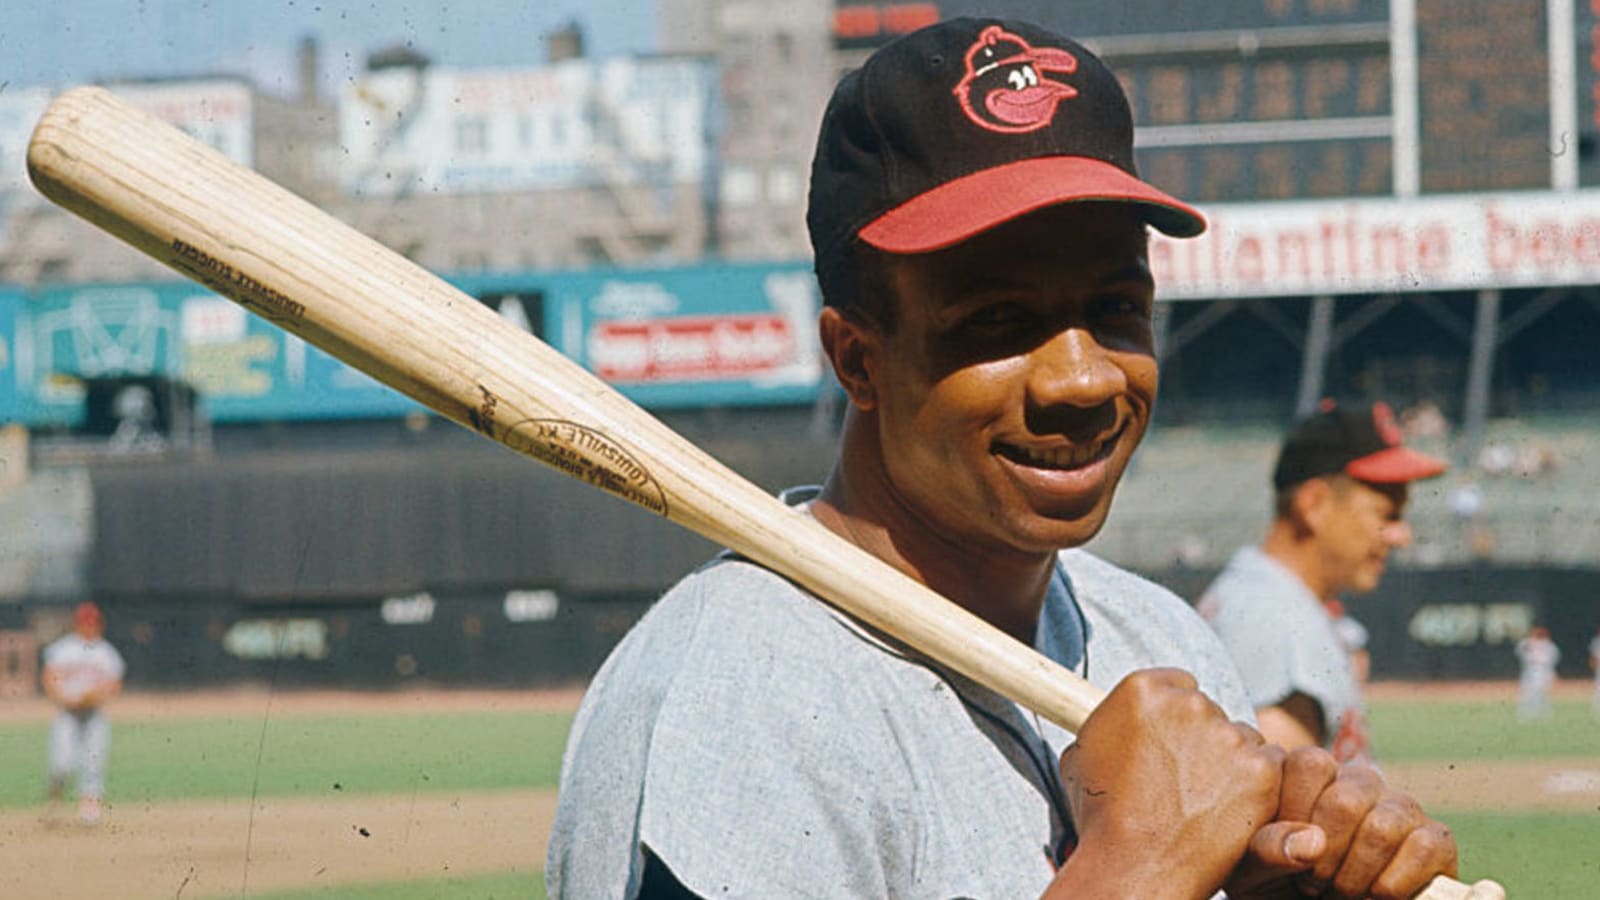 Who are the greatest AfricanAmerican baseball players of all time